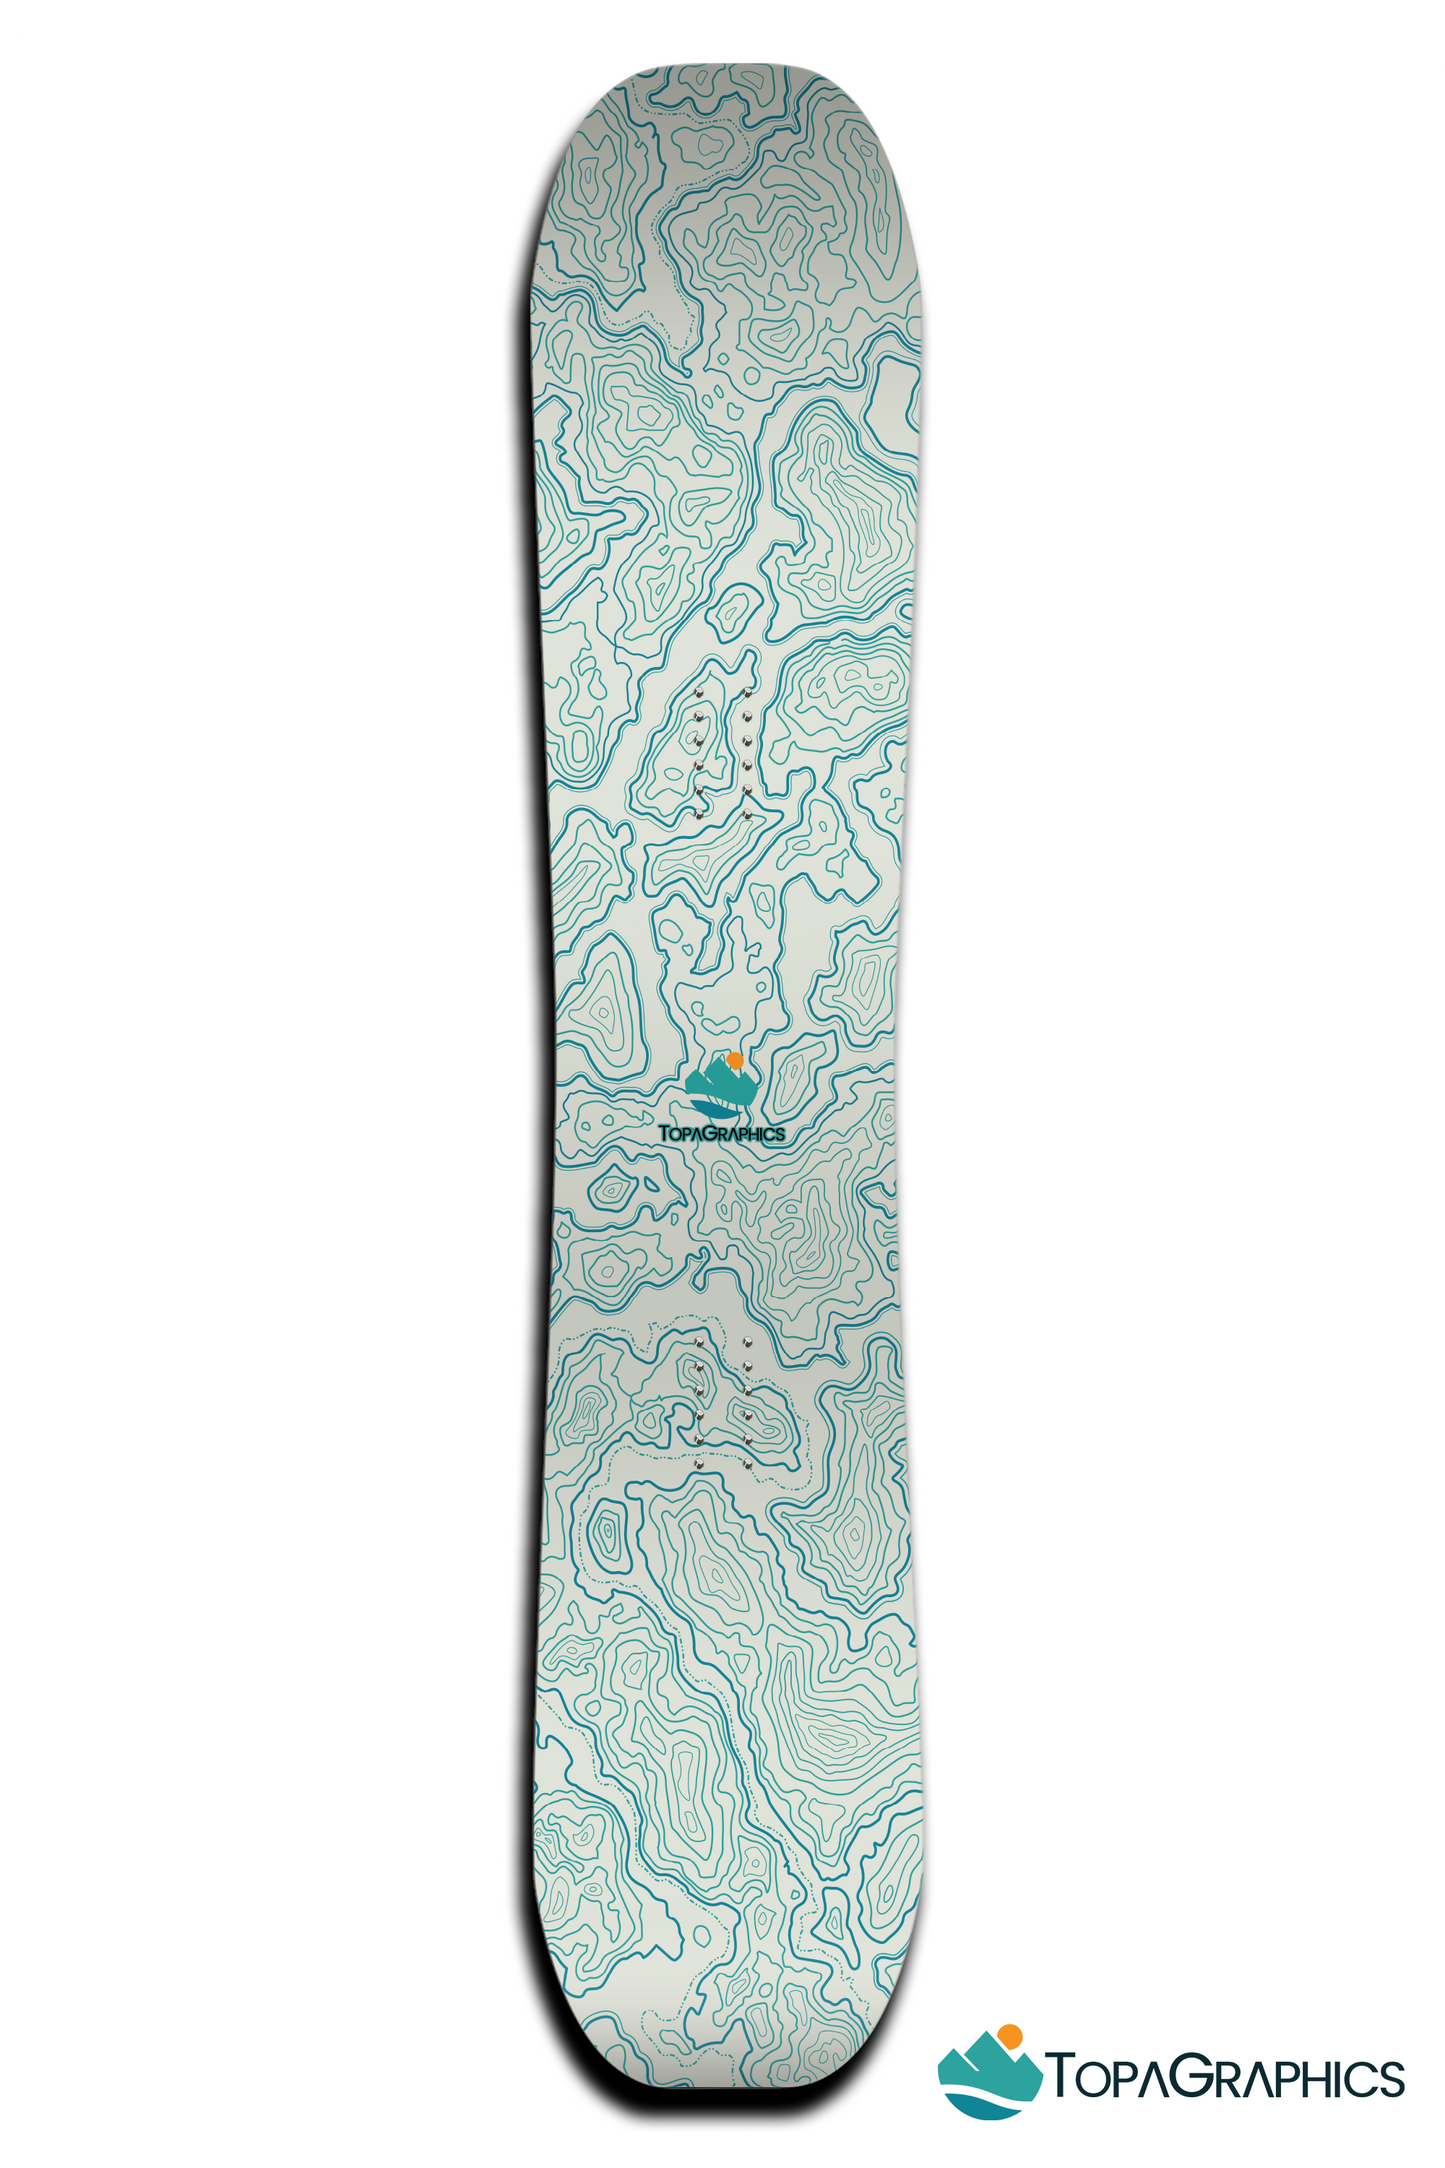 Topographic Map Snowboard Wrap